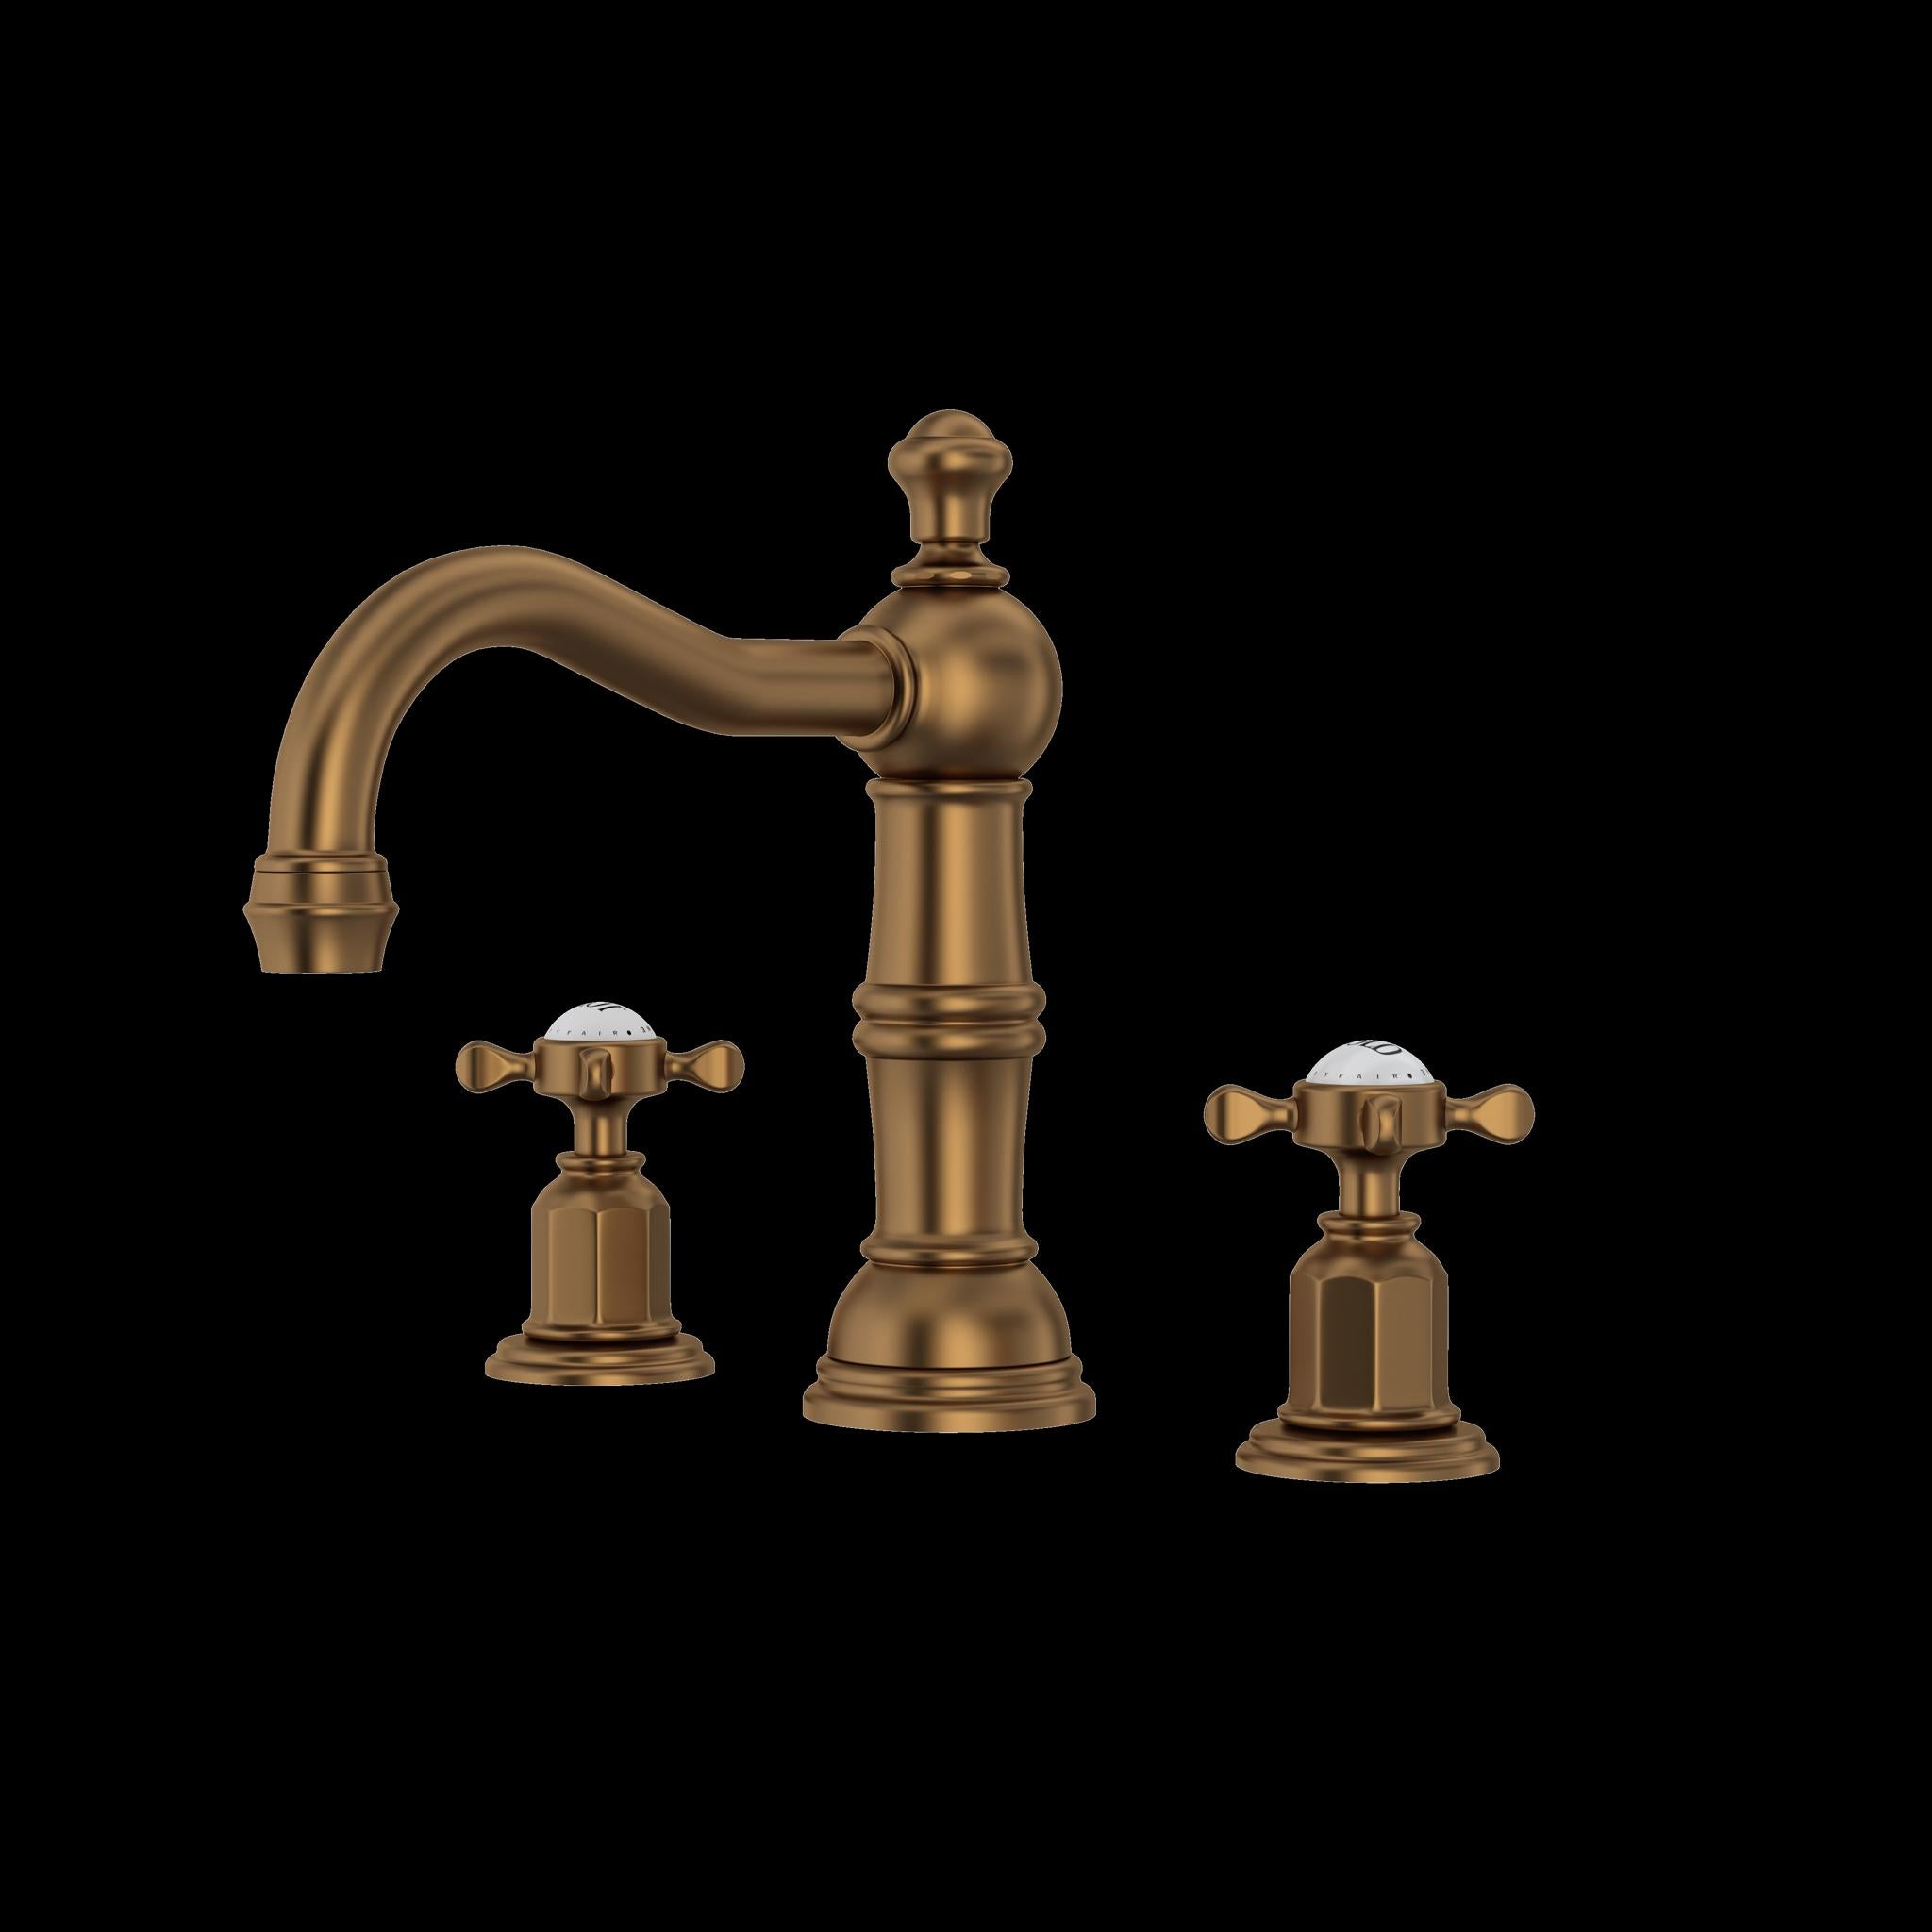 Perrin & Rowe U.3721 Edwardian Widespread Lavatory Faucet With Column Spout